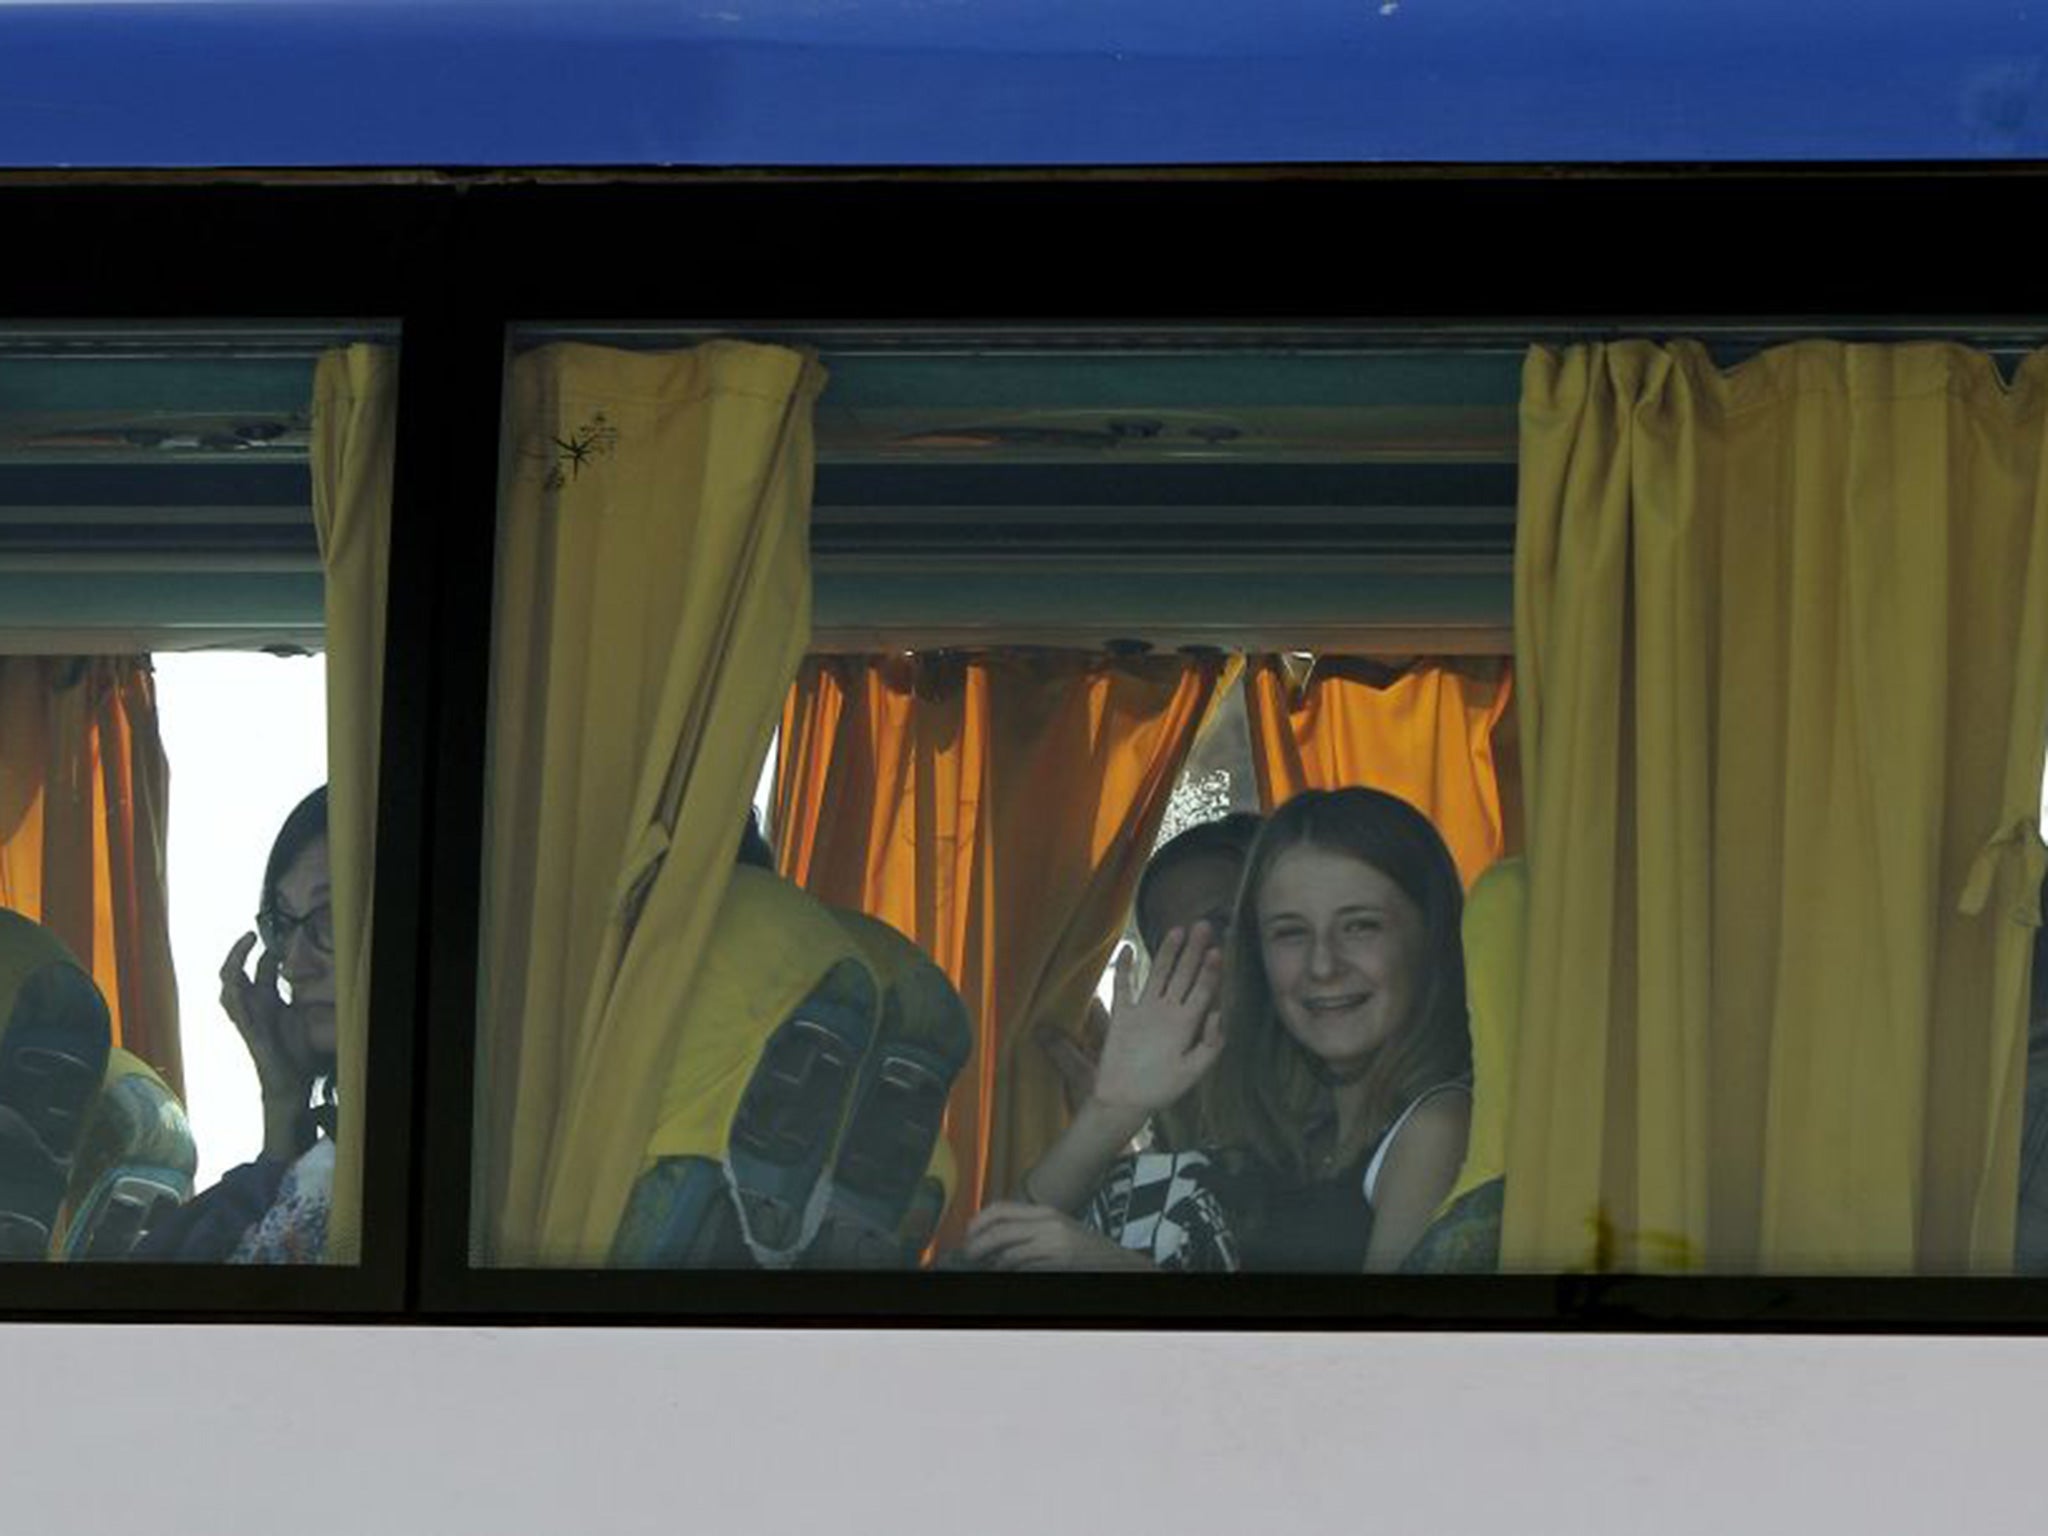 A tourist bus at Sharm el Sheikh airport yesterday